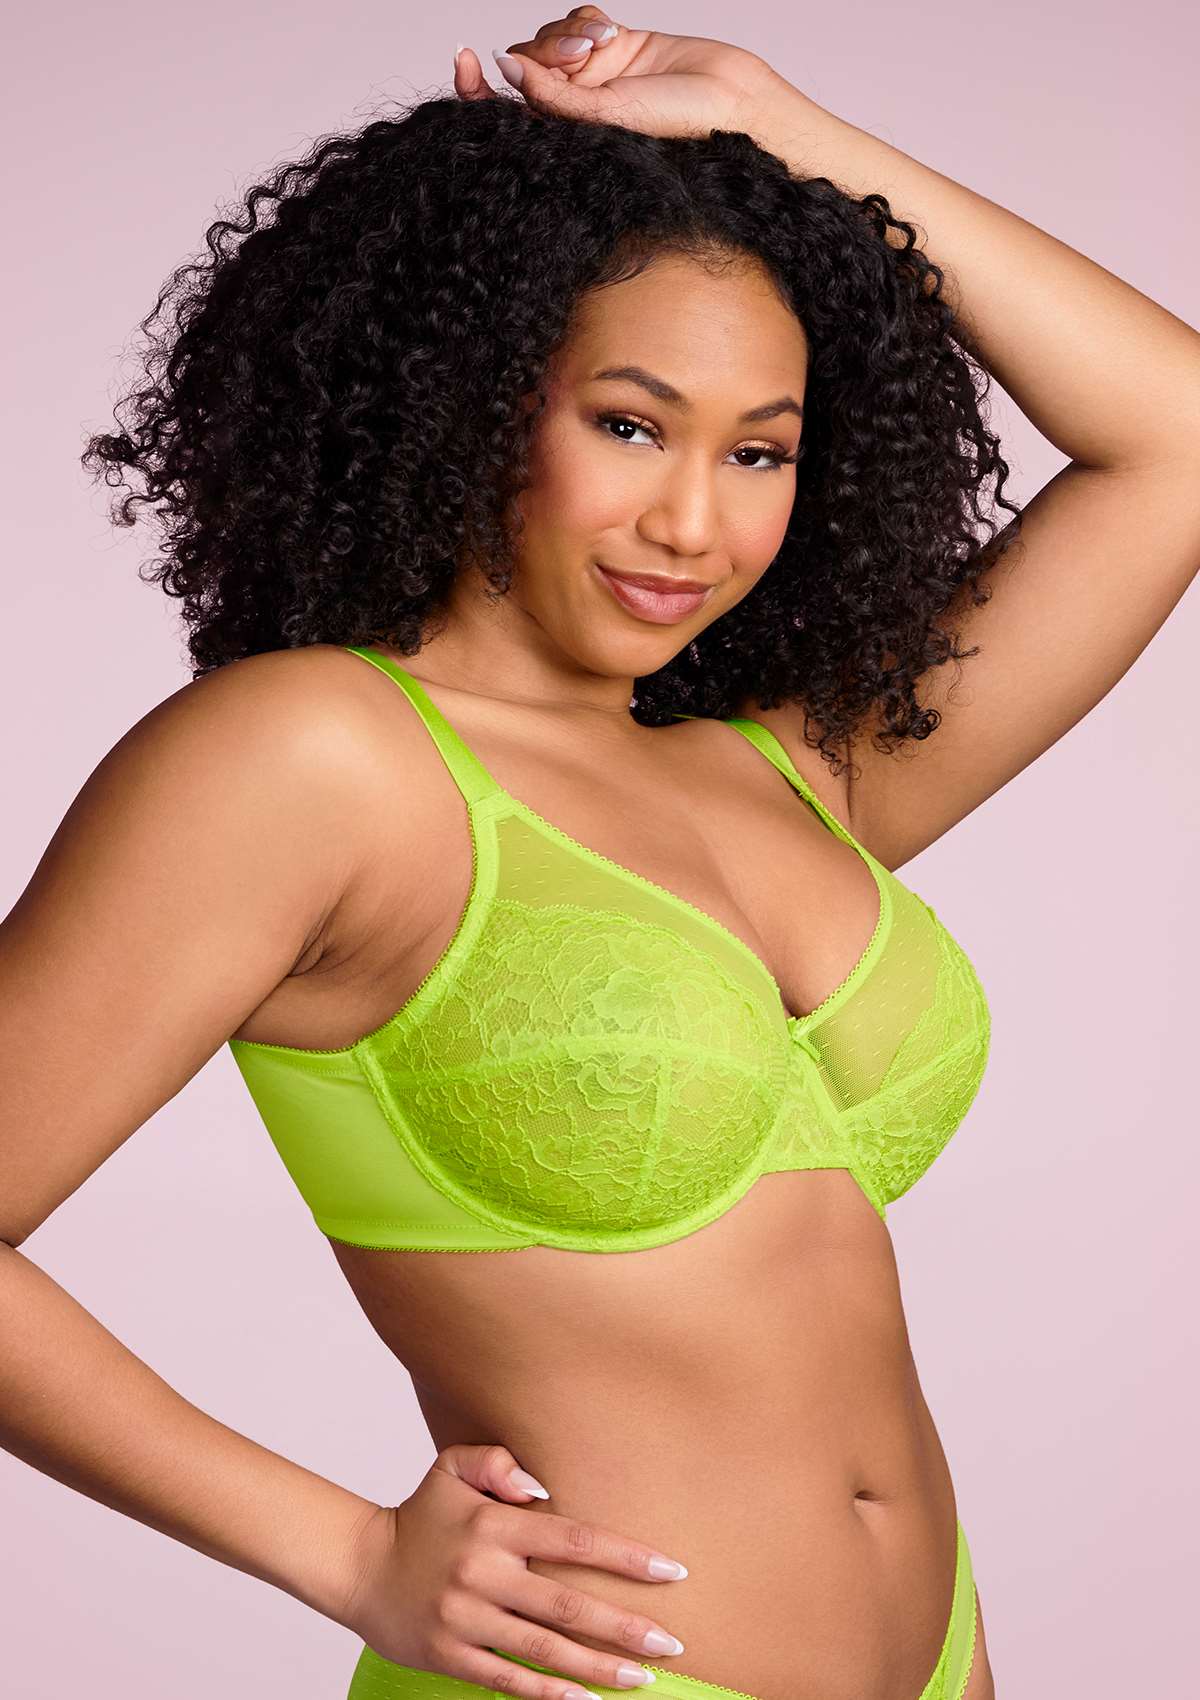 HSIA Enchante Full Cup Minimizing Bra: Supportive Unlined Lace Bra - Lime Green / 38 / DD/E